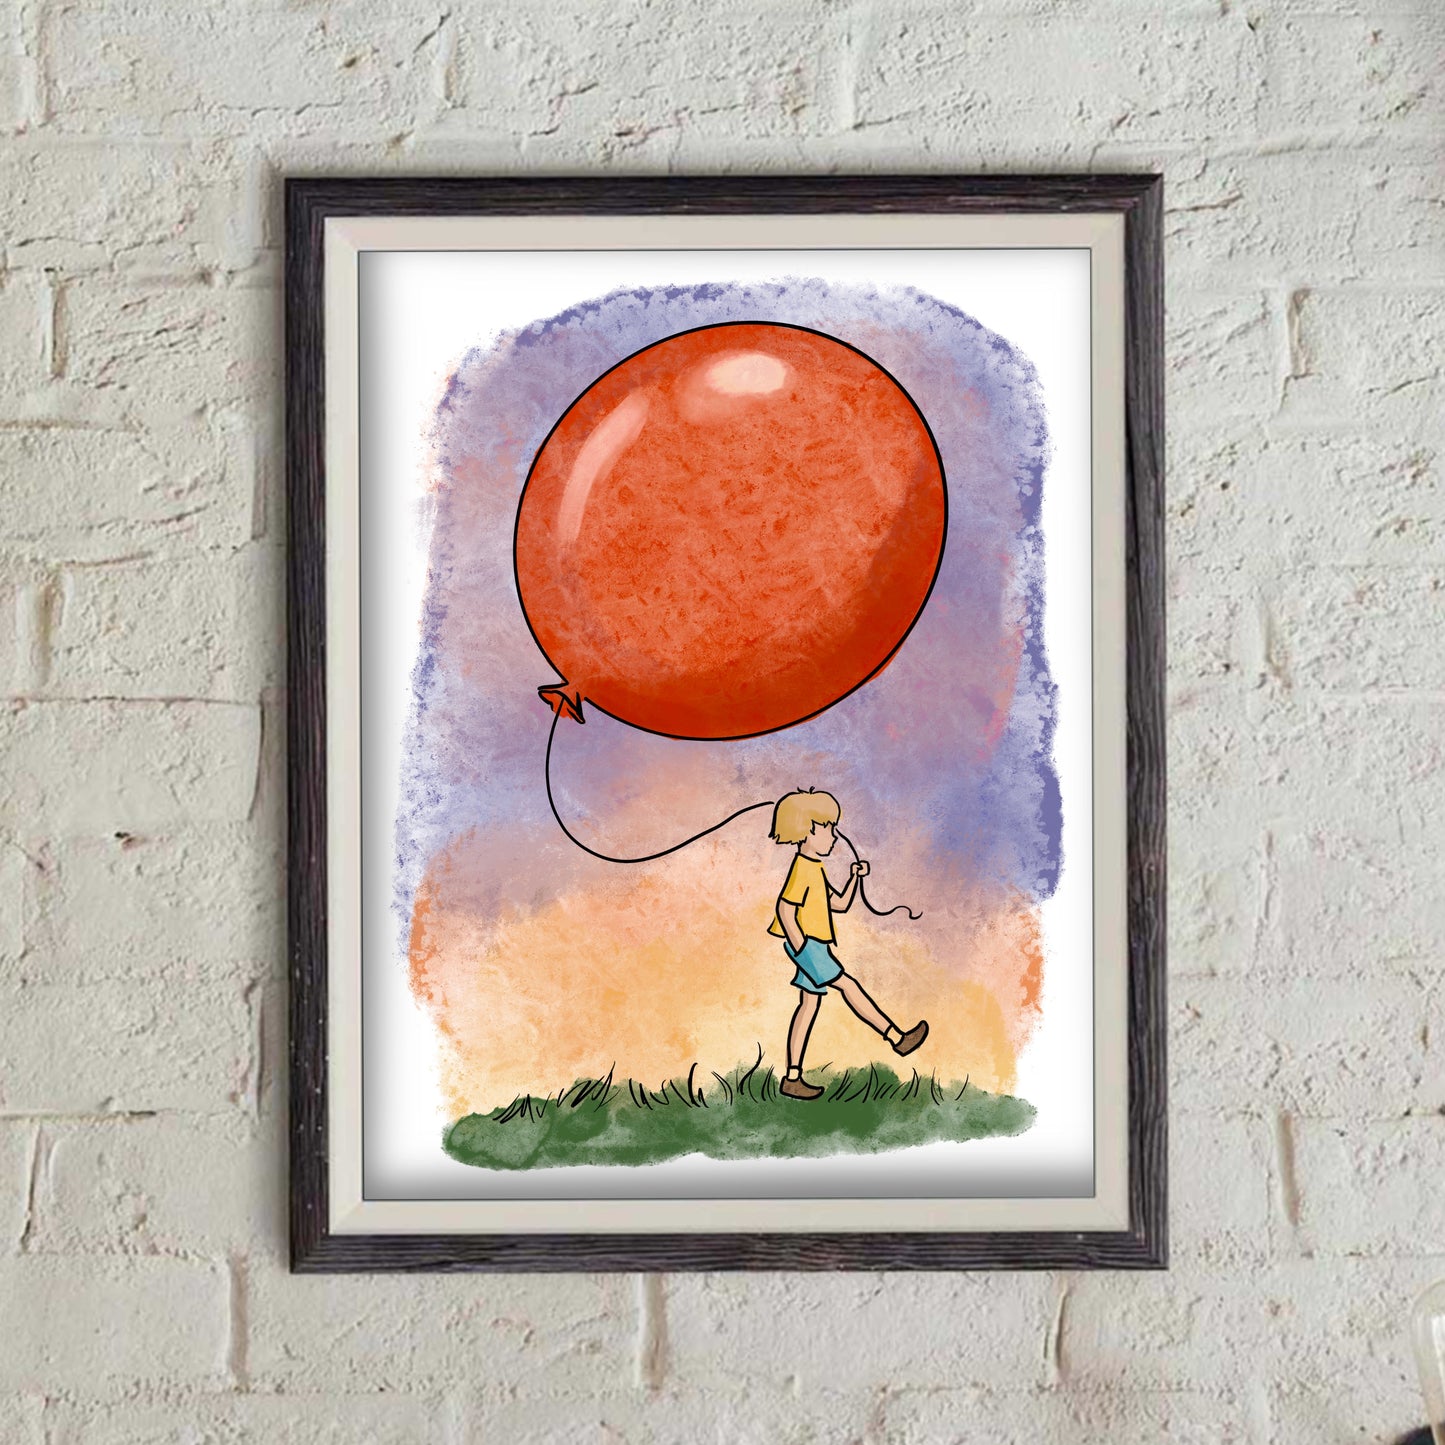 Christopher Robin with a Balloon - Pooh print